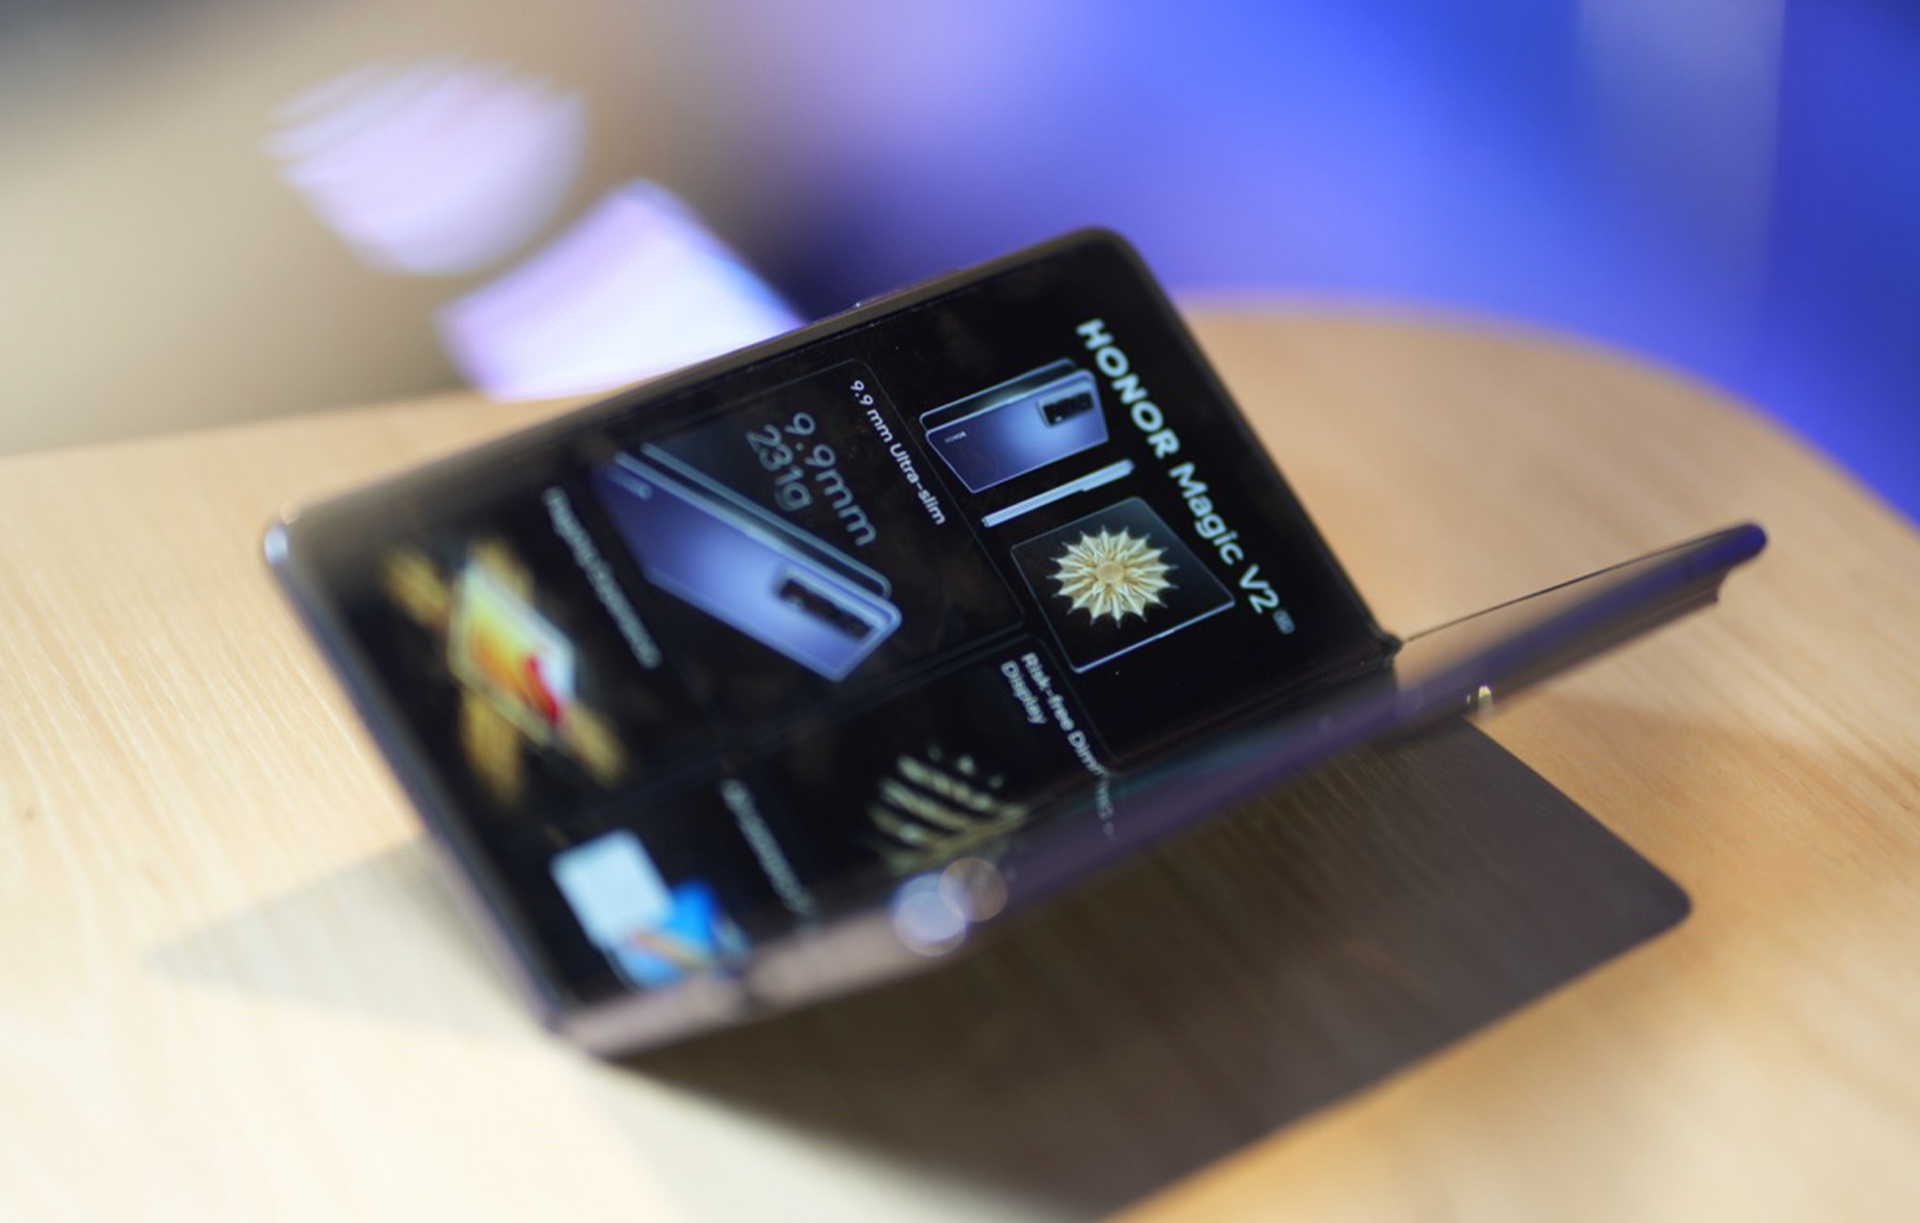 The HONOR foldable smartphone on the table